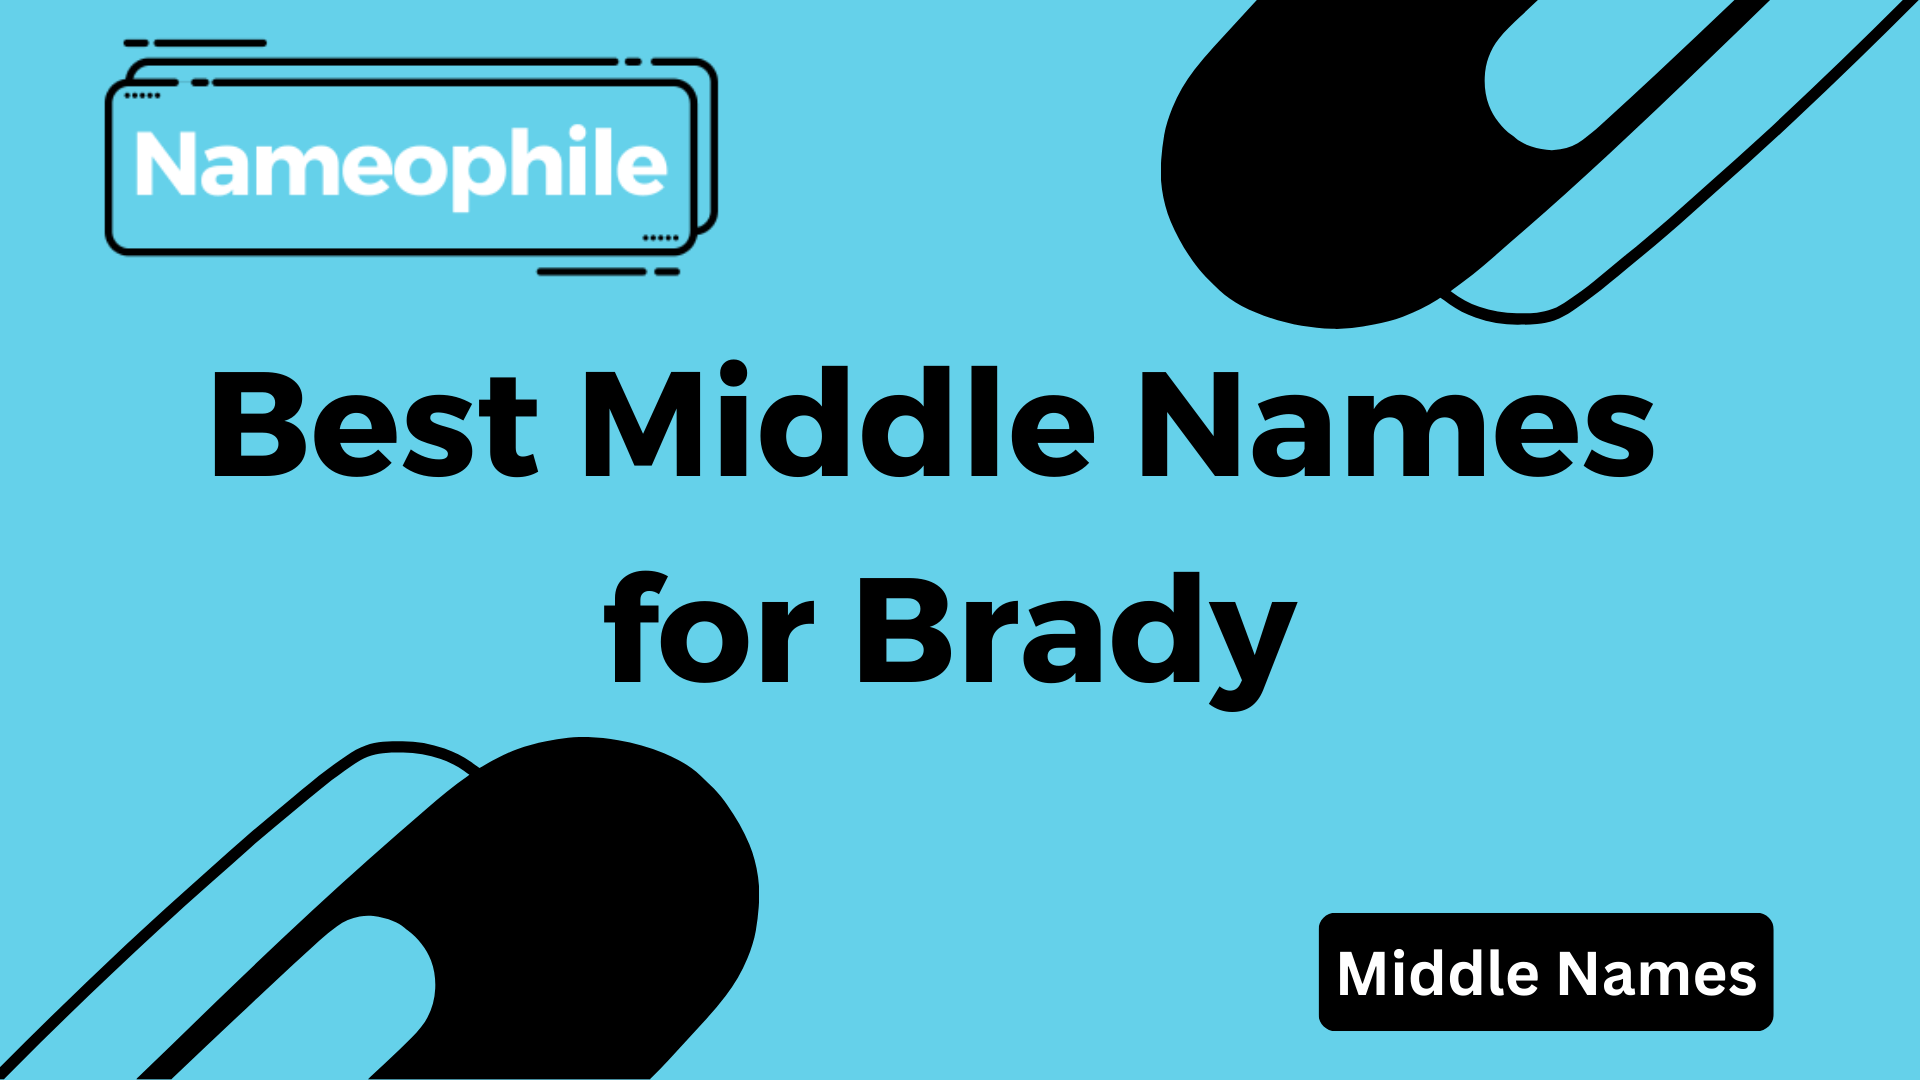 Best Middle Names for Brady